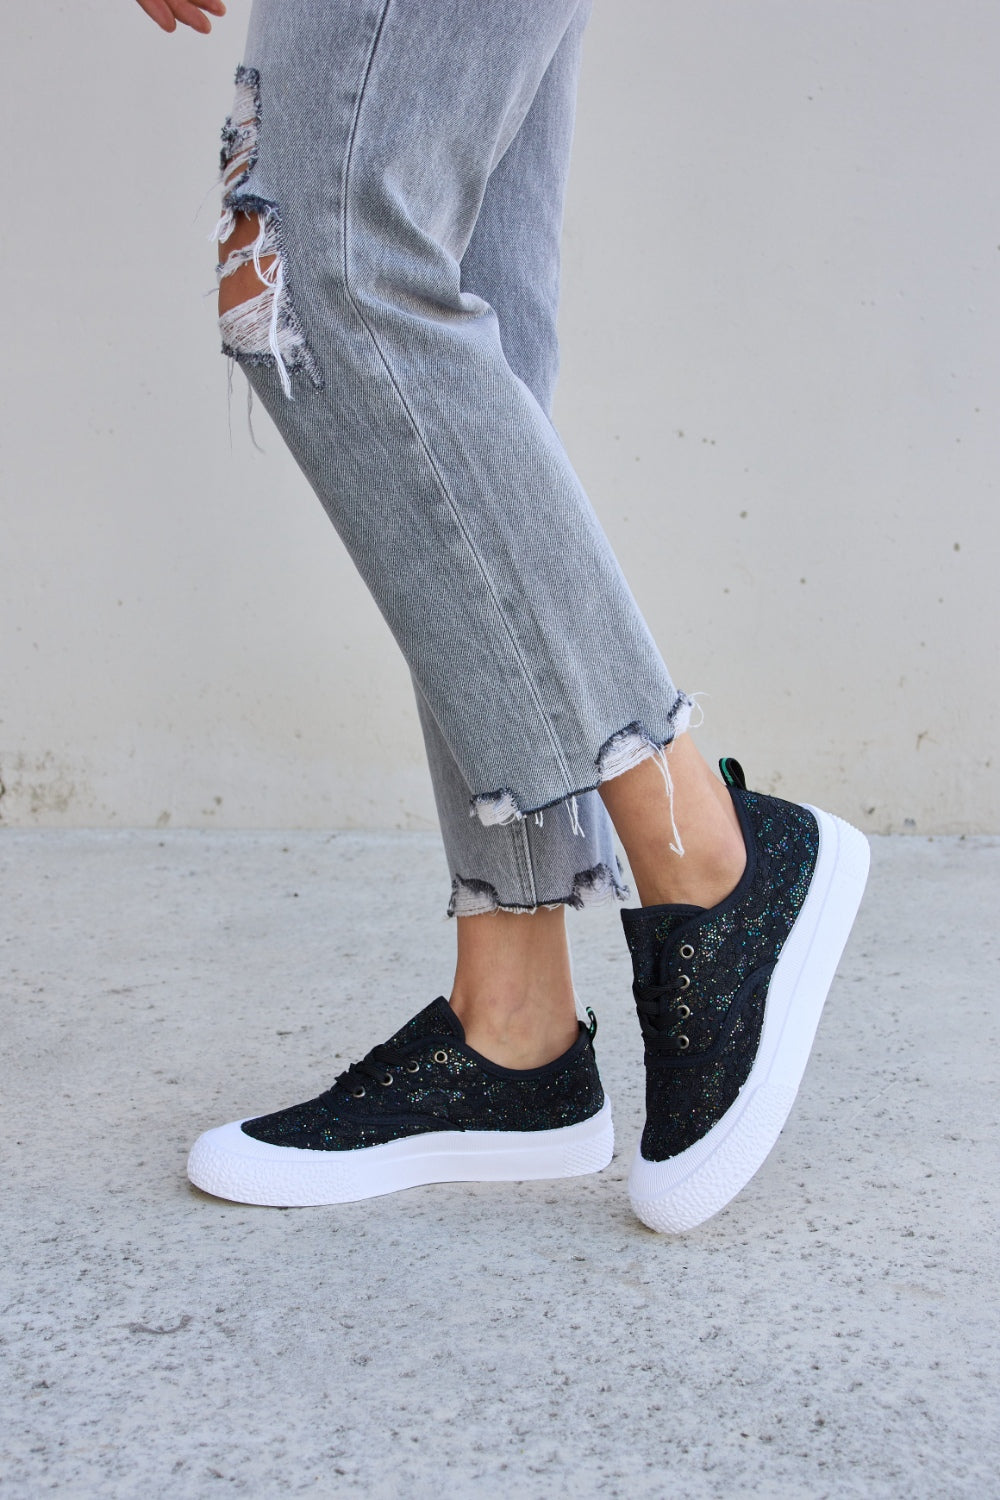 Forever Link Sequin Lace-Up Platform Sneakers: The Trendy, Sparkly Footwear Choice